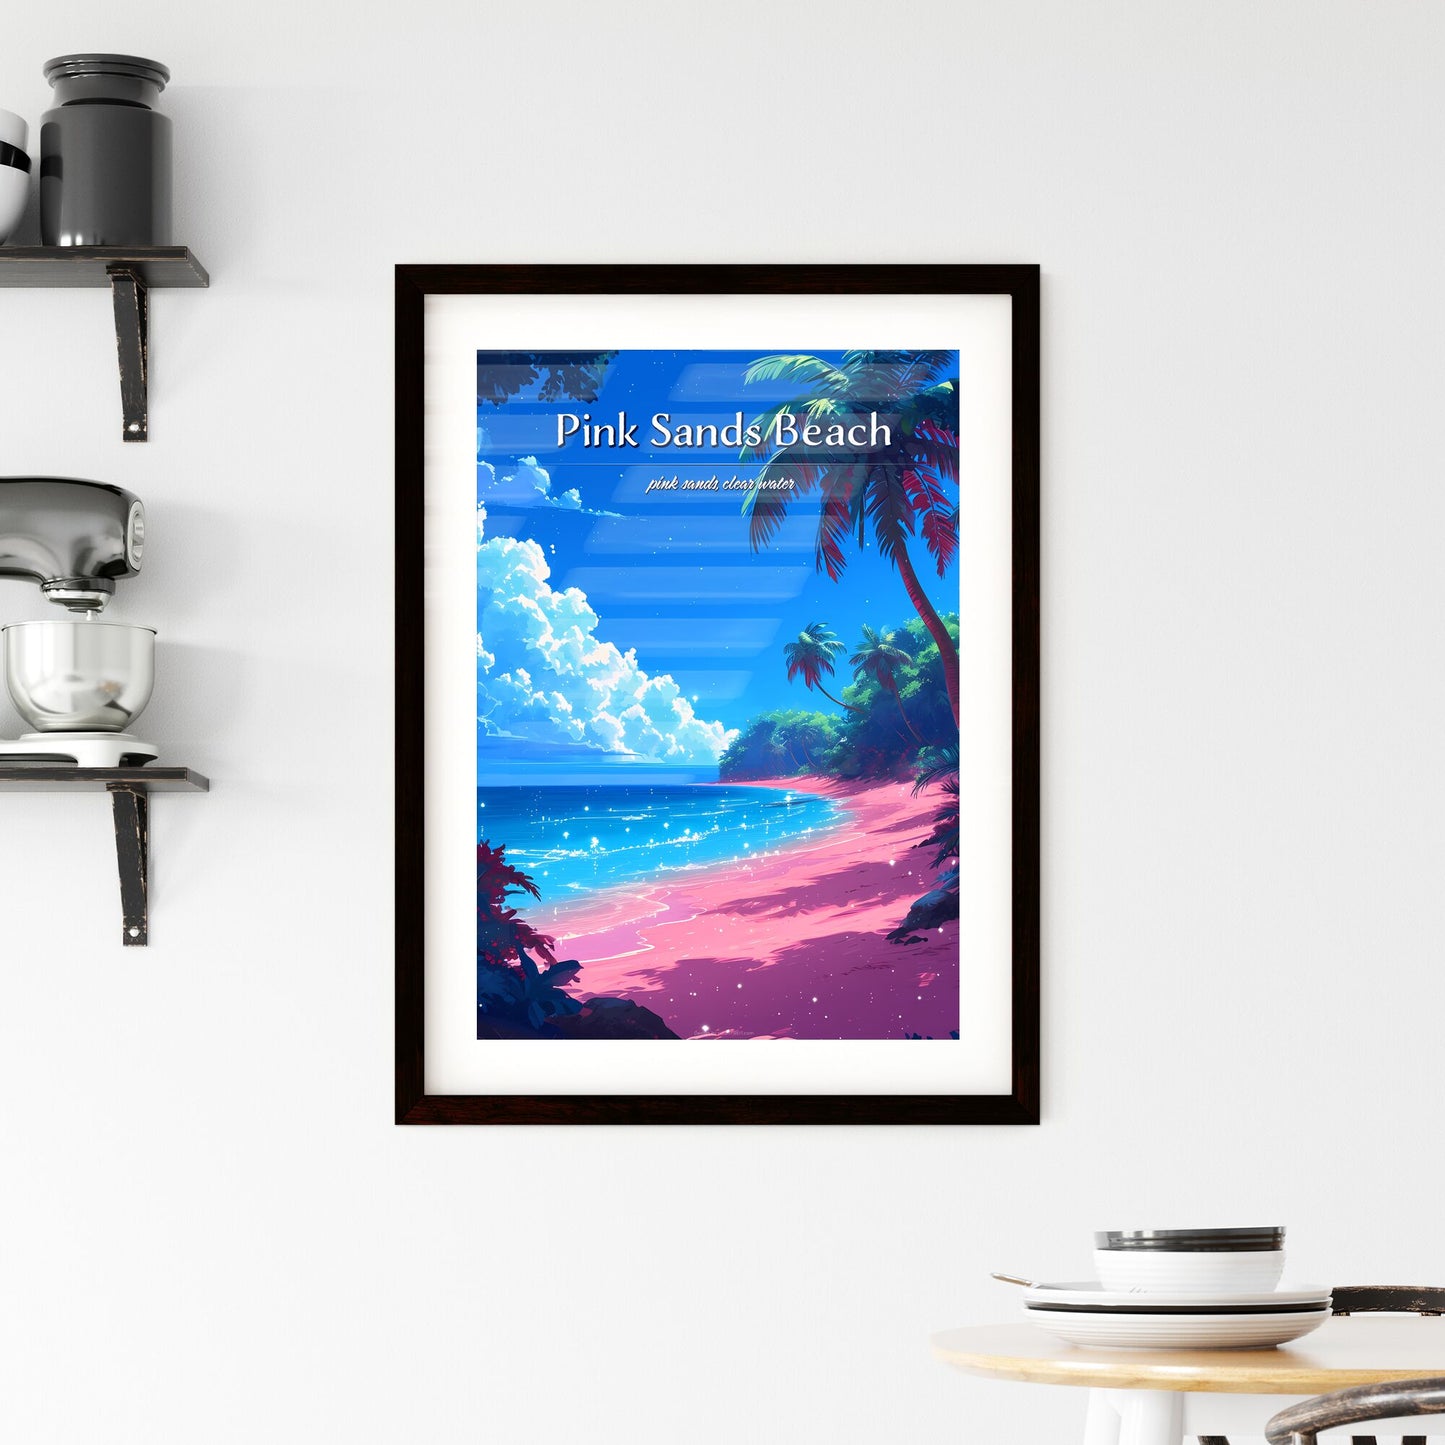 Pink Sands Beach - Art print of a beach with palm trees and blue water Default Title